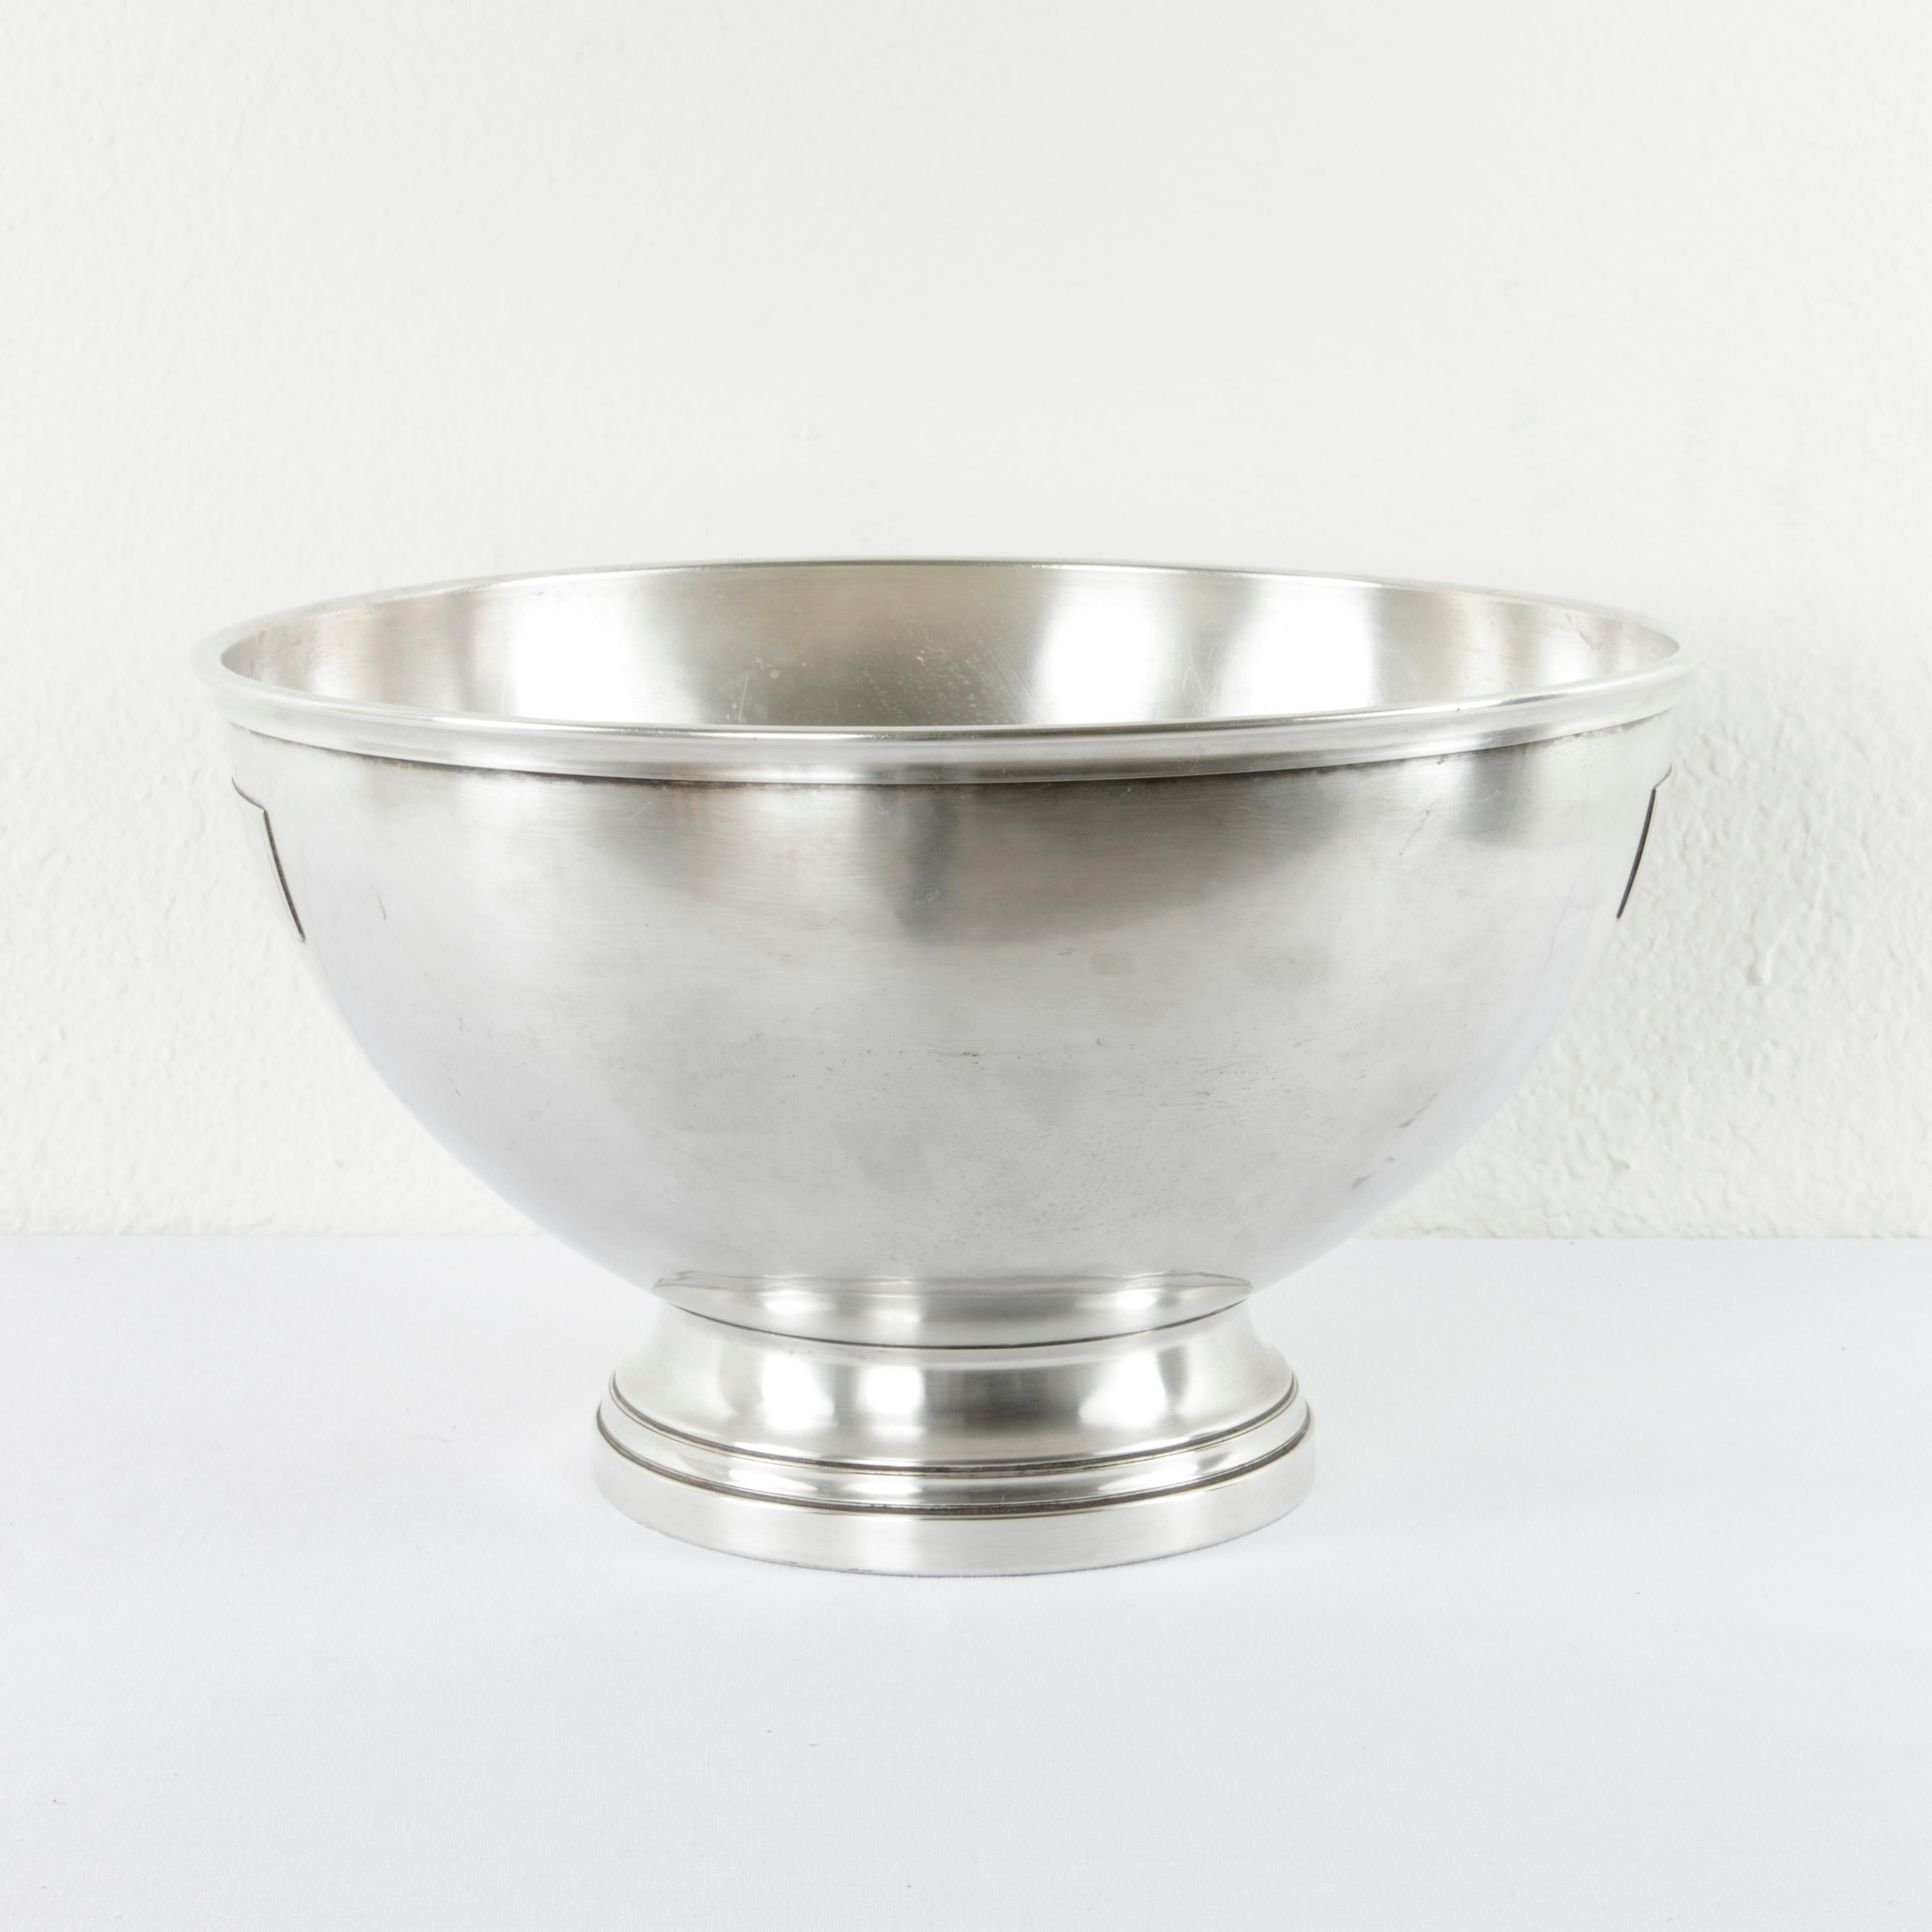 20th Century Midcentury French Silver Plate Jacquart Hotel Champagne Bucket for Four Bottles